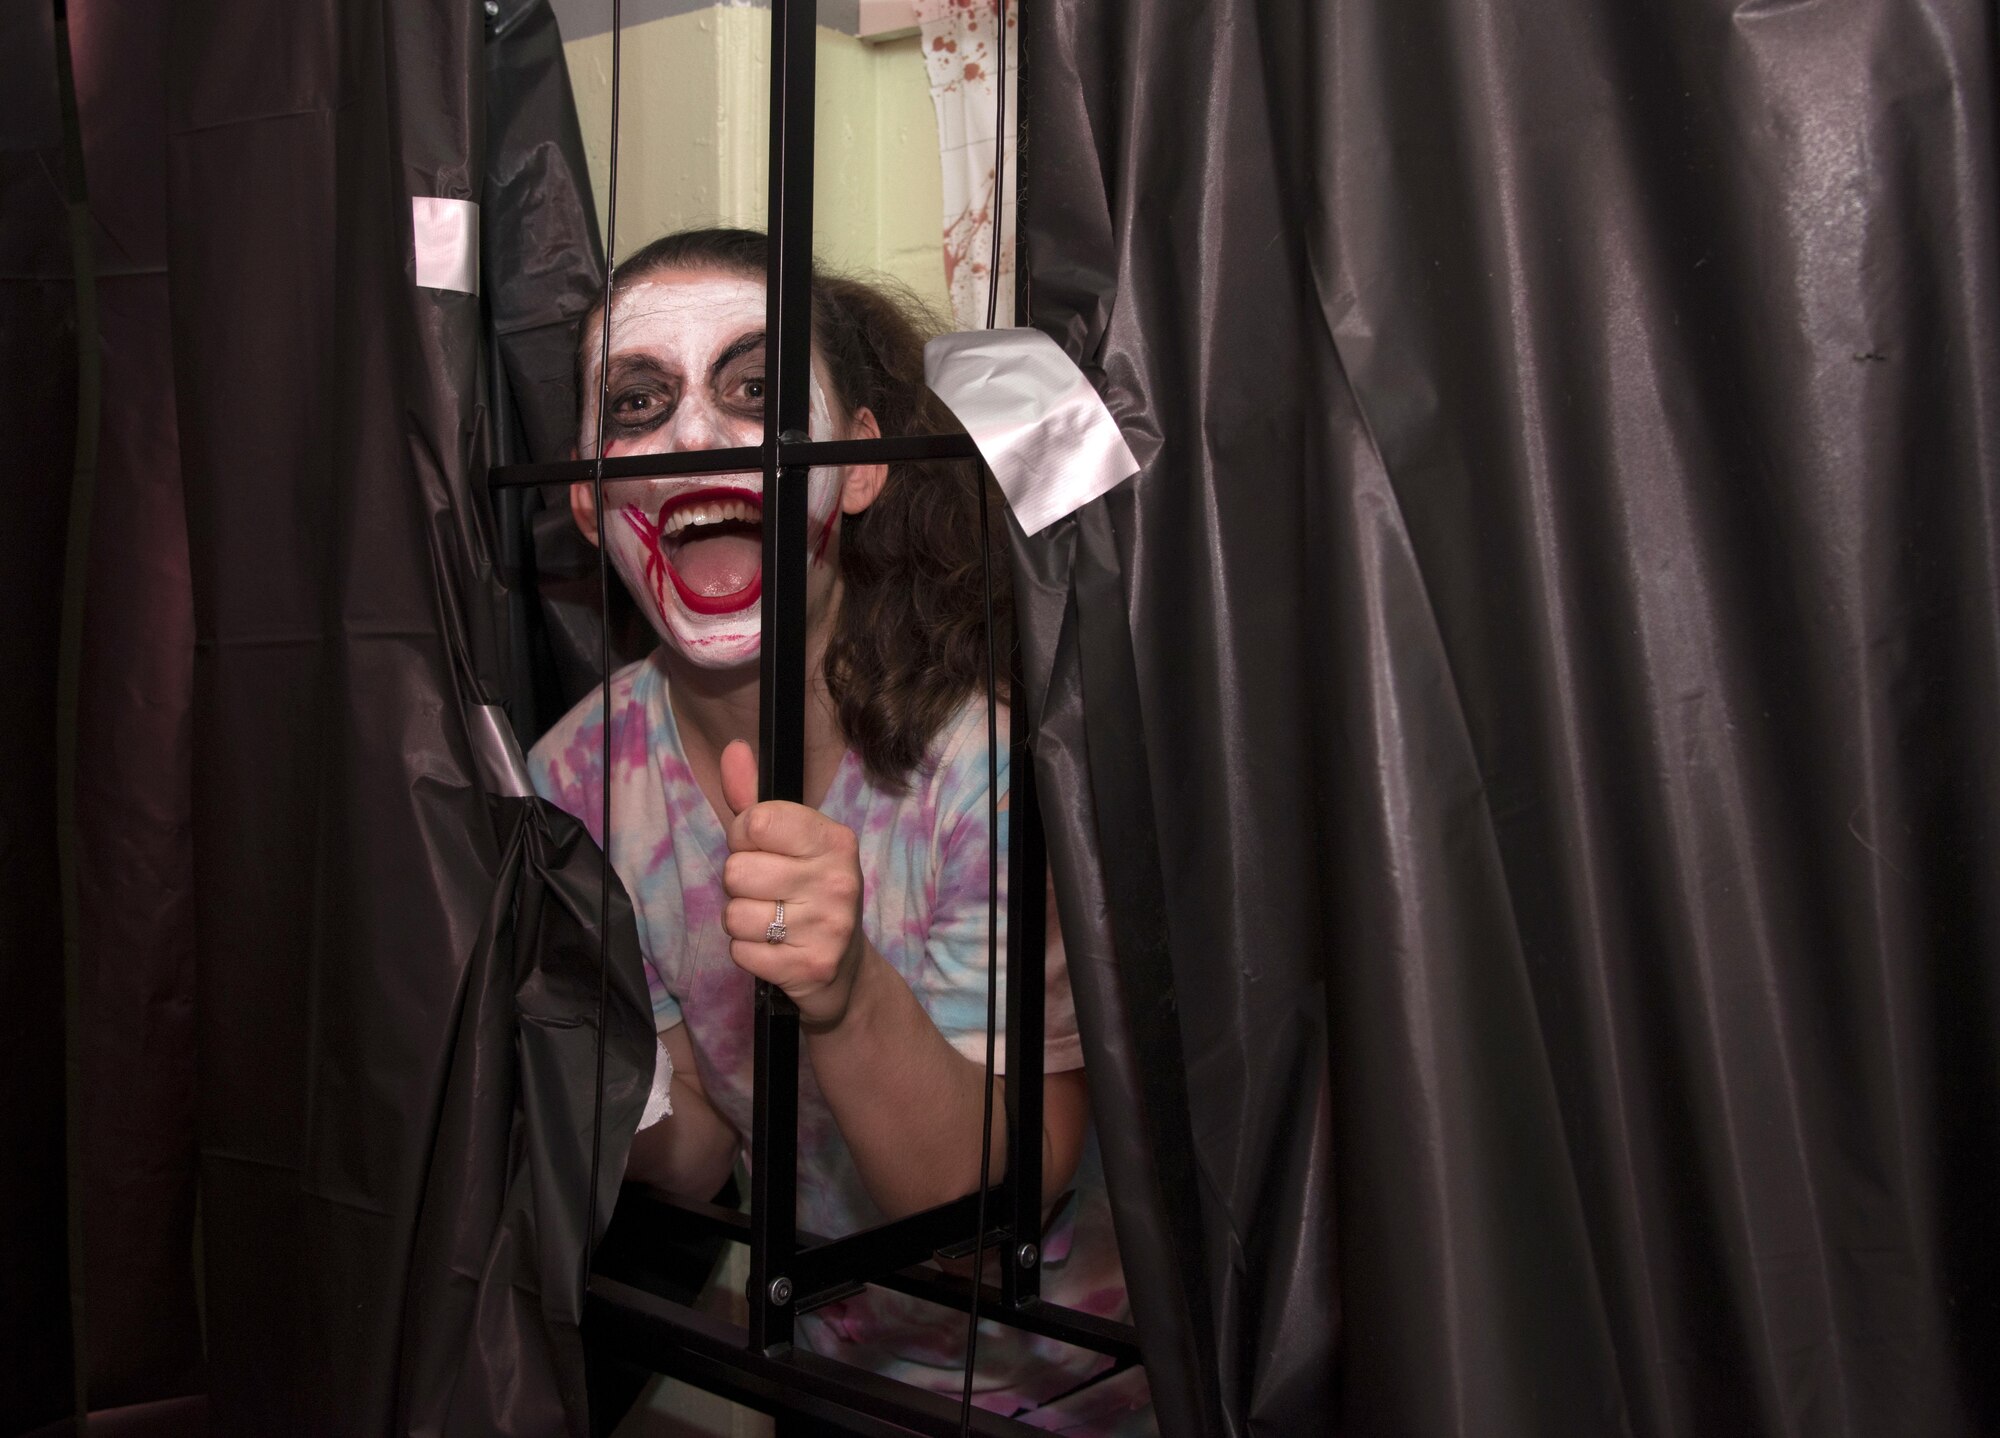 Airman 1st Class Heather Fejerang, broadcast journalist with the 6th Air Mobility Wing Public Affairs office, participates at the MacThrillville haunted house at MacDill Air Force Base, Fla., Oct. 20, 2017.